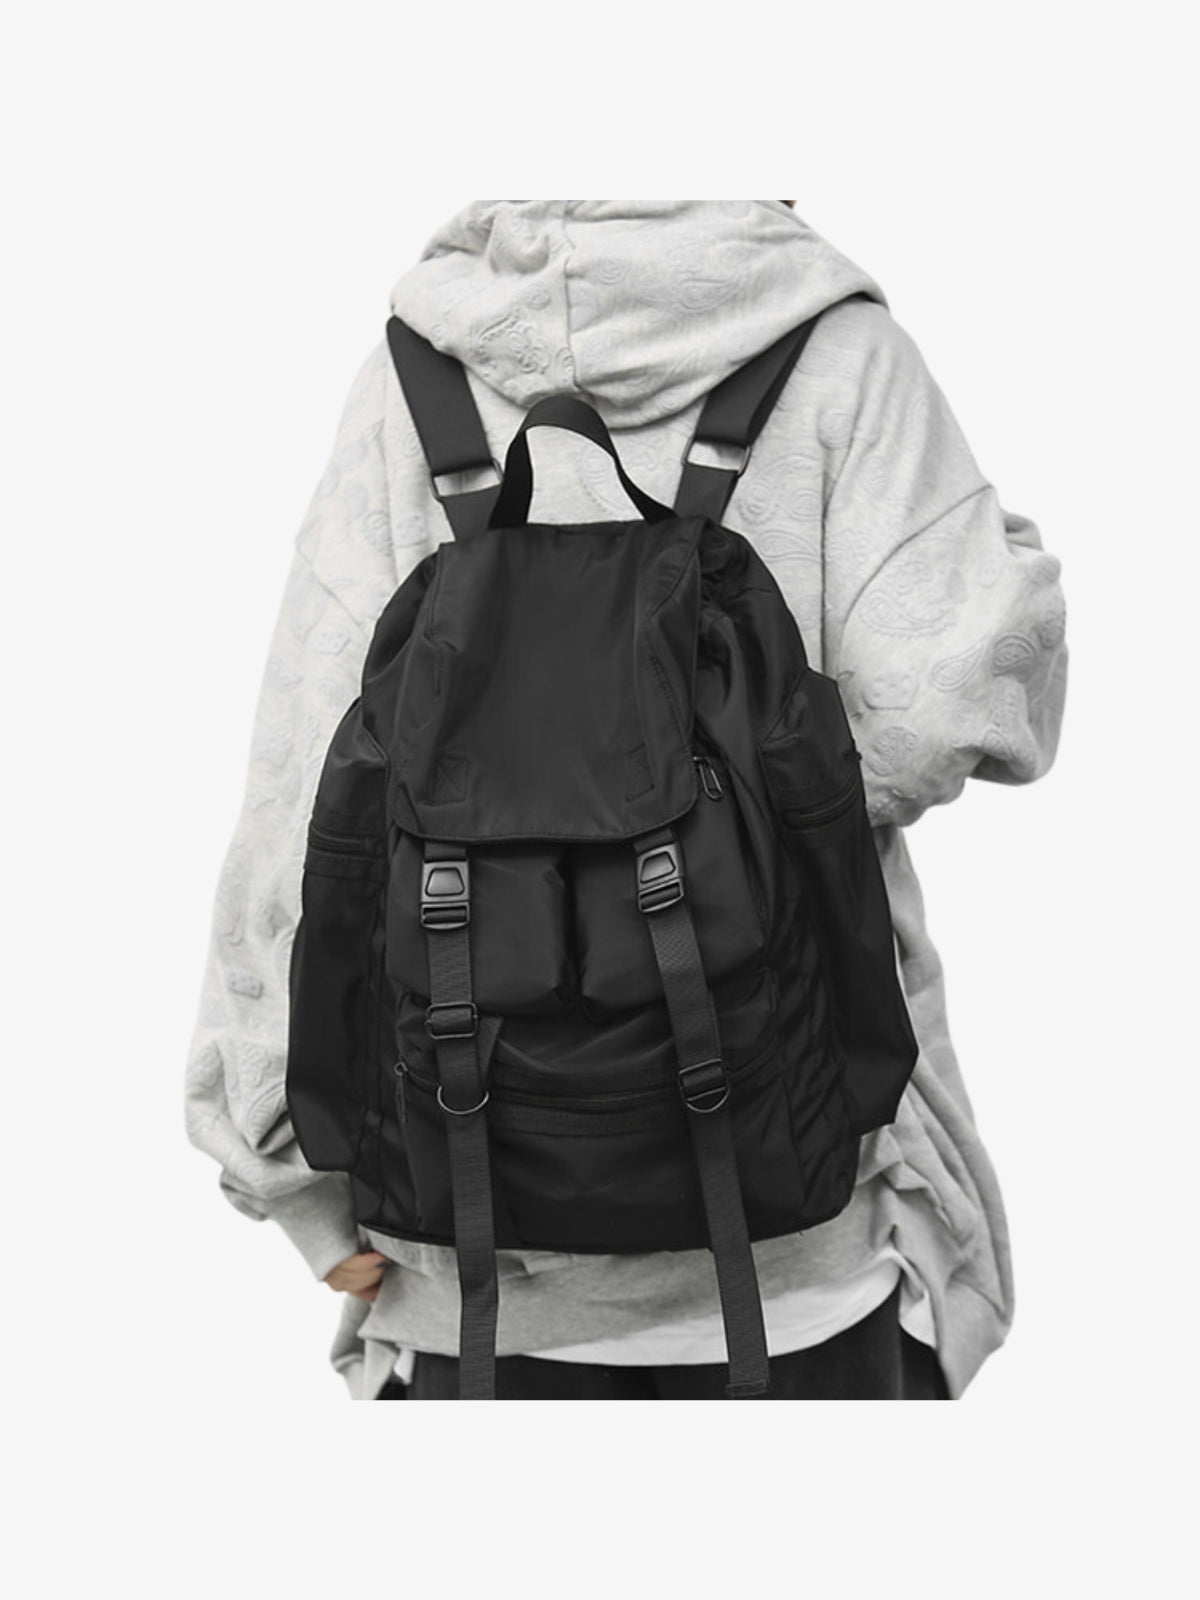 TideTech Functional Backpack